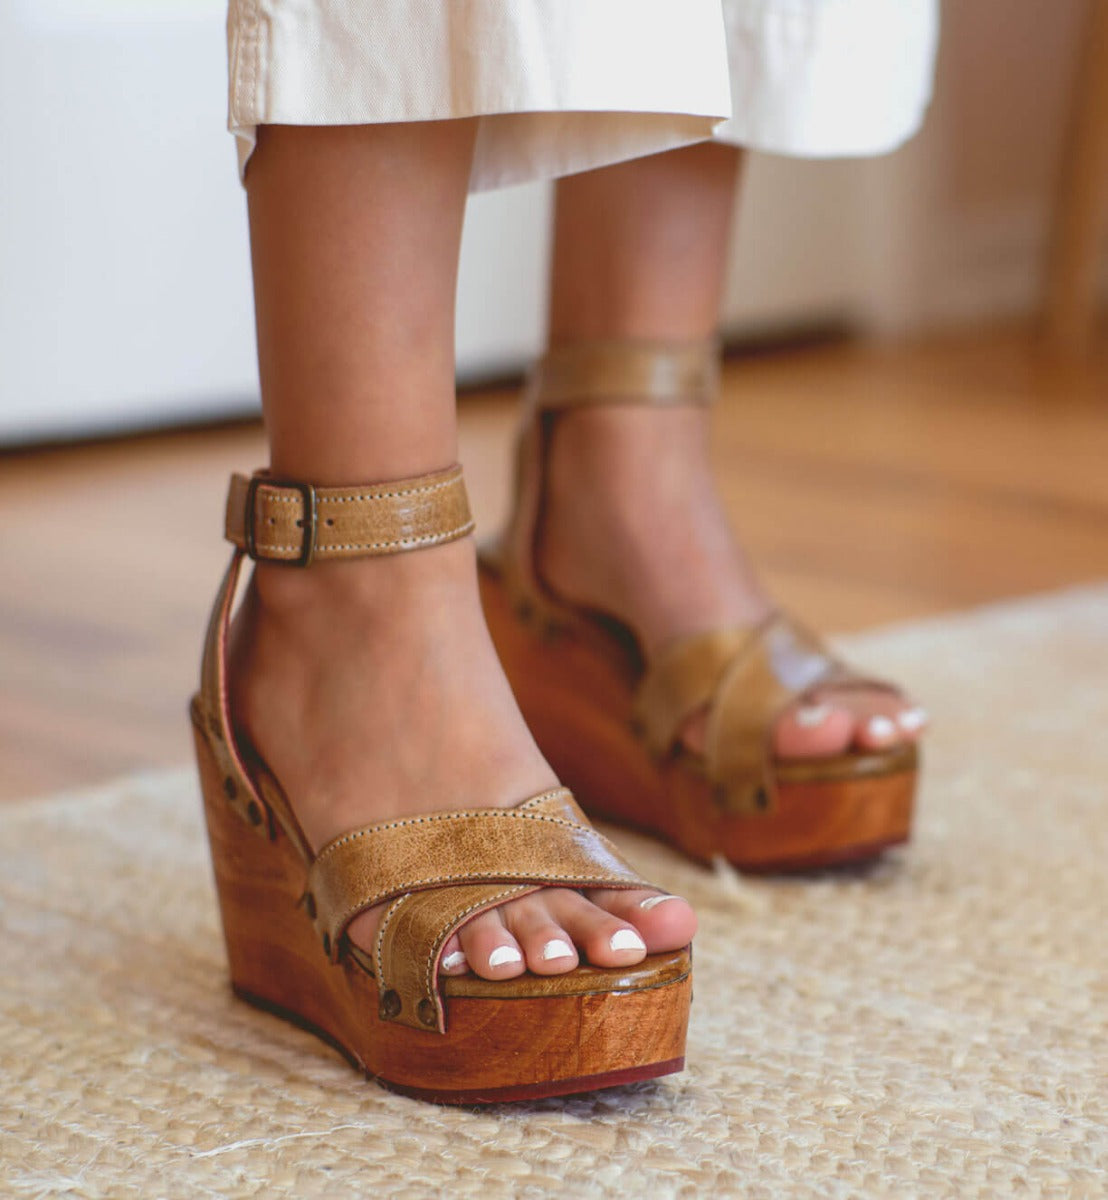 A woman's feet standing on a rug in a pair of Bed Stu Grettell sandals.